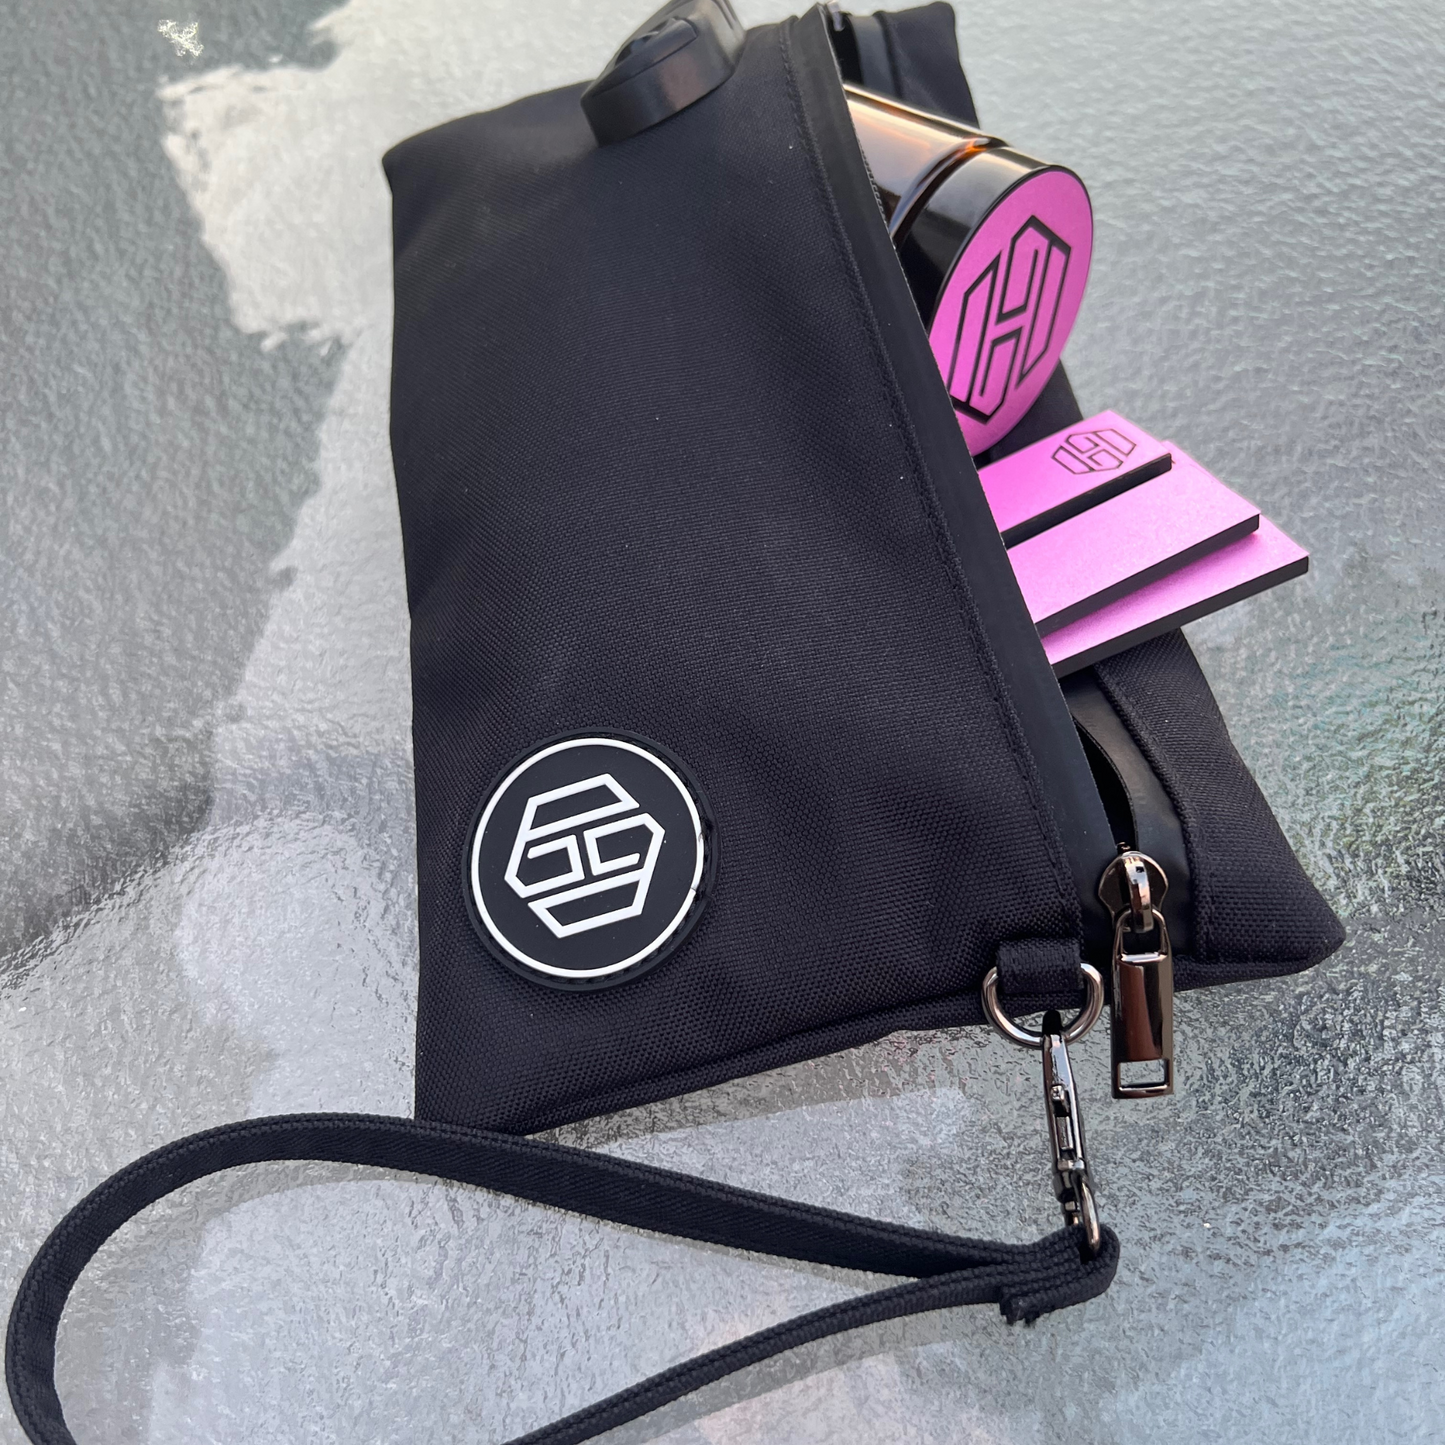 Smell Proof Clutch with Lock and Jar - Black